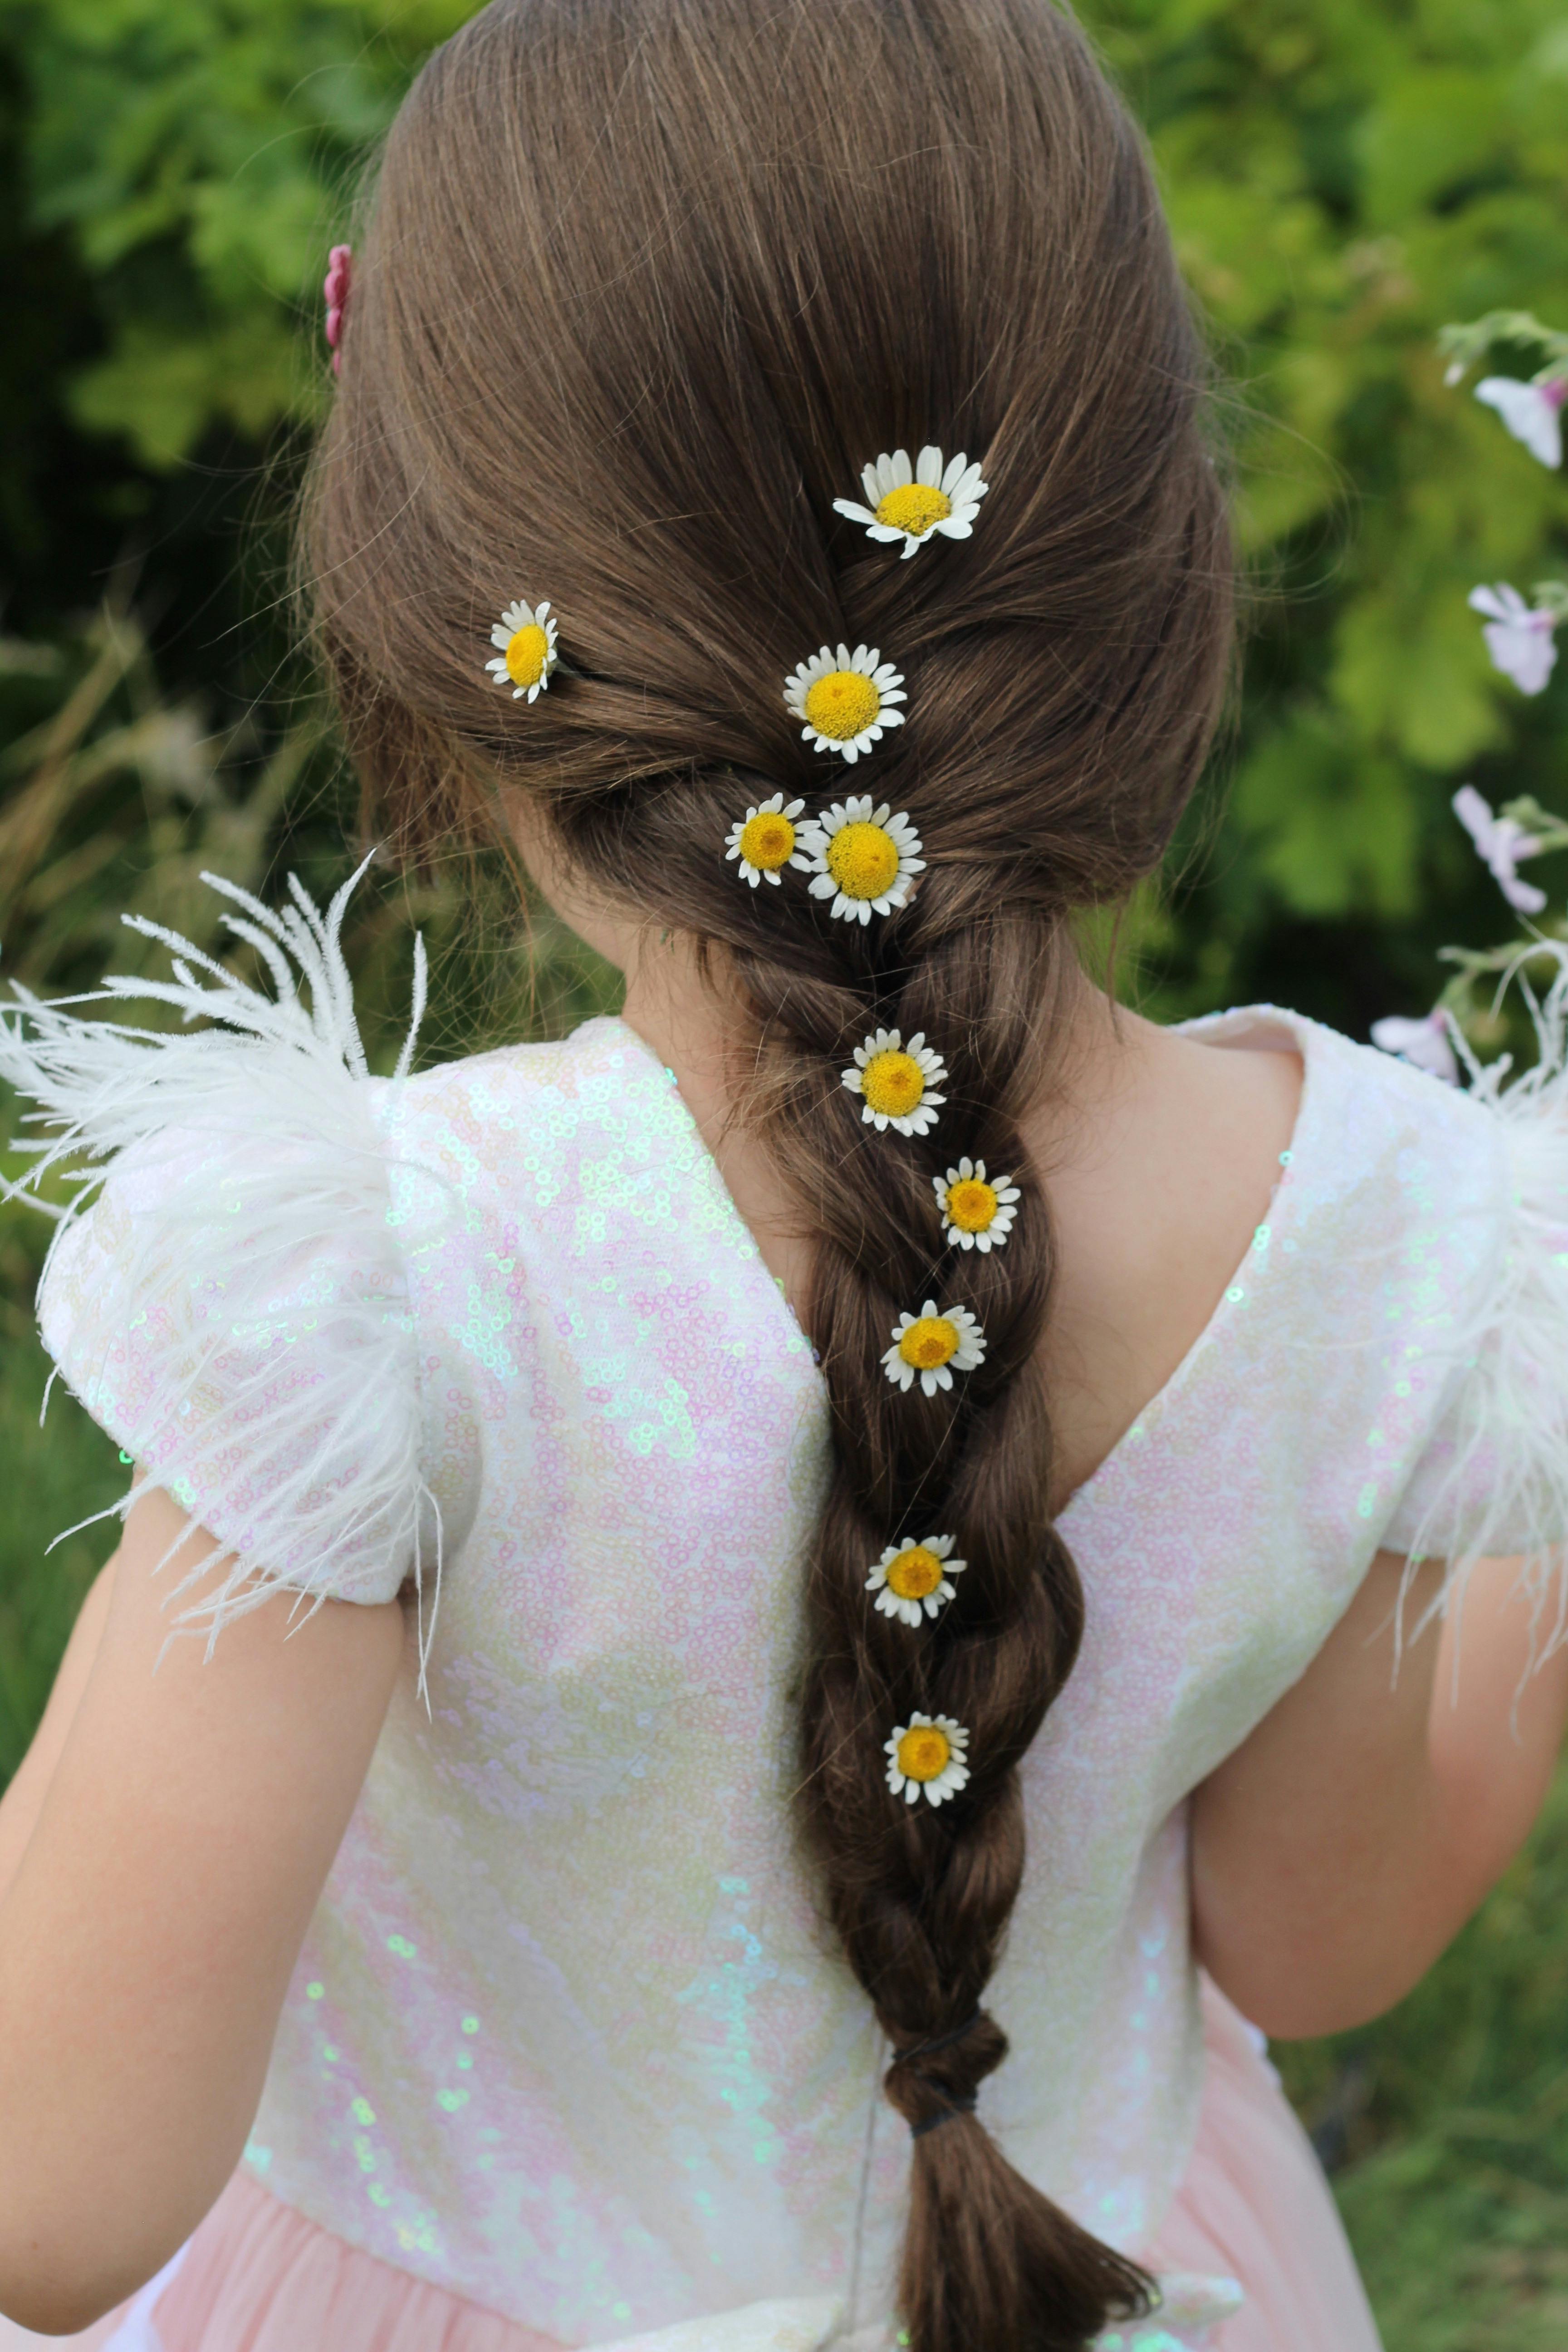 White Cherry Blossom Flowers on the Girl's Braided Hair · Free Stock Photo